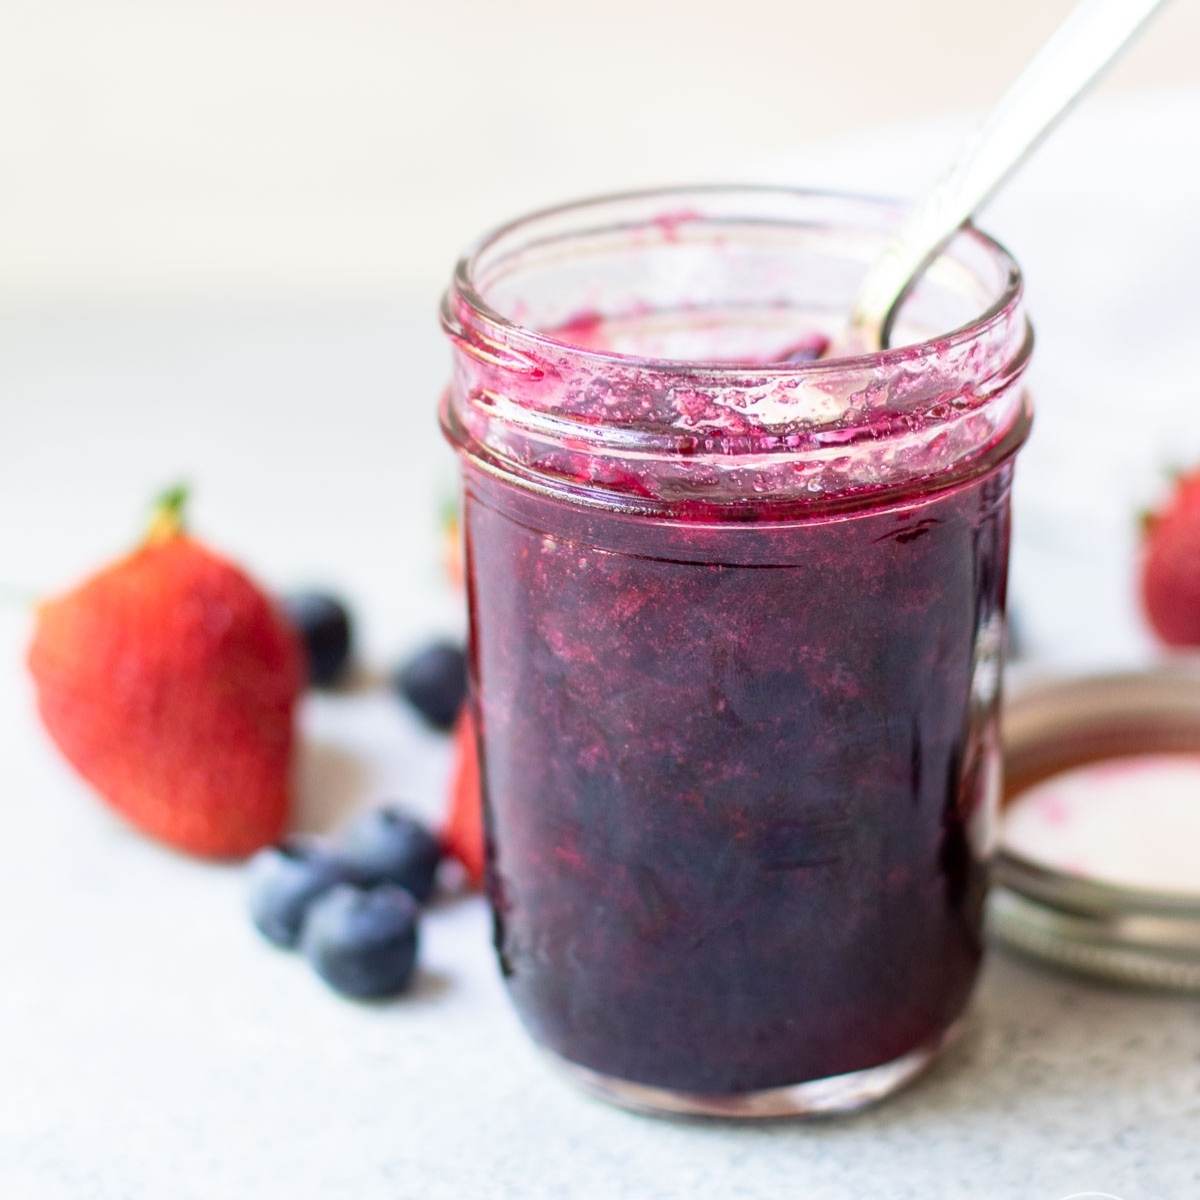 Jam in a pint-sized jar with a spoon inside and scattered strawberries and blueberries surrounding it.